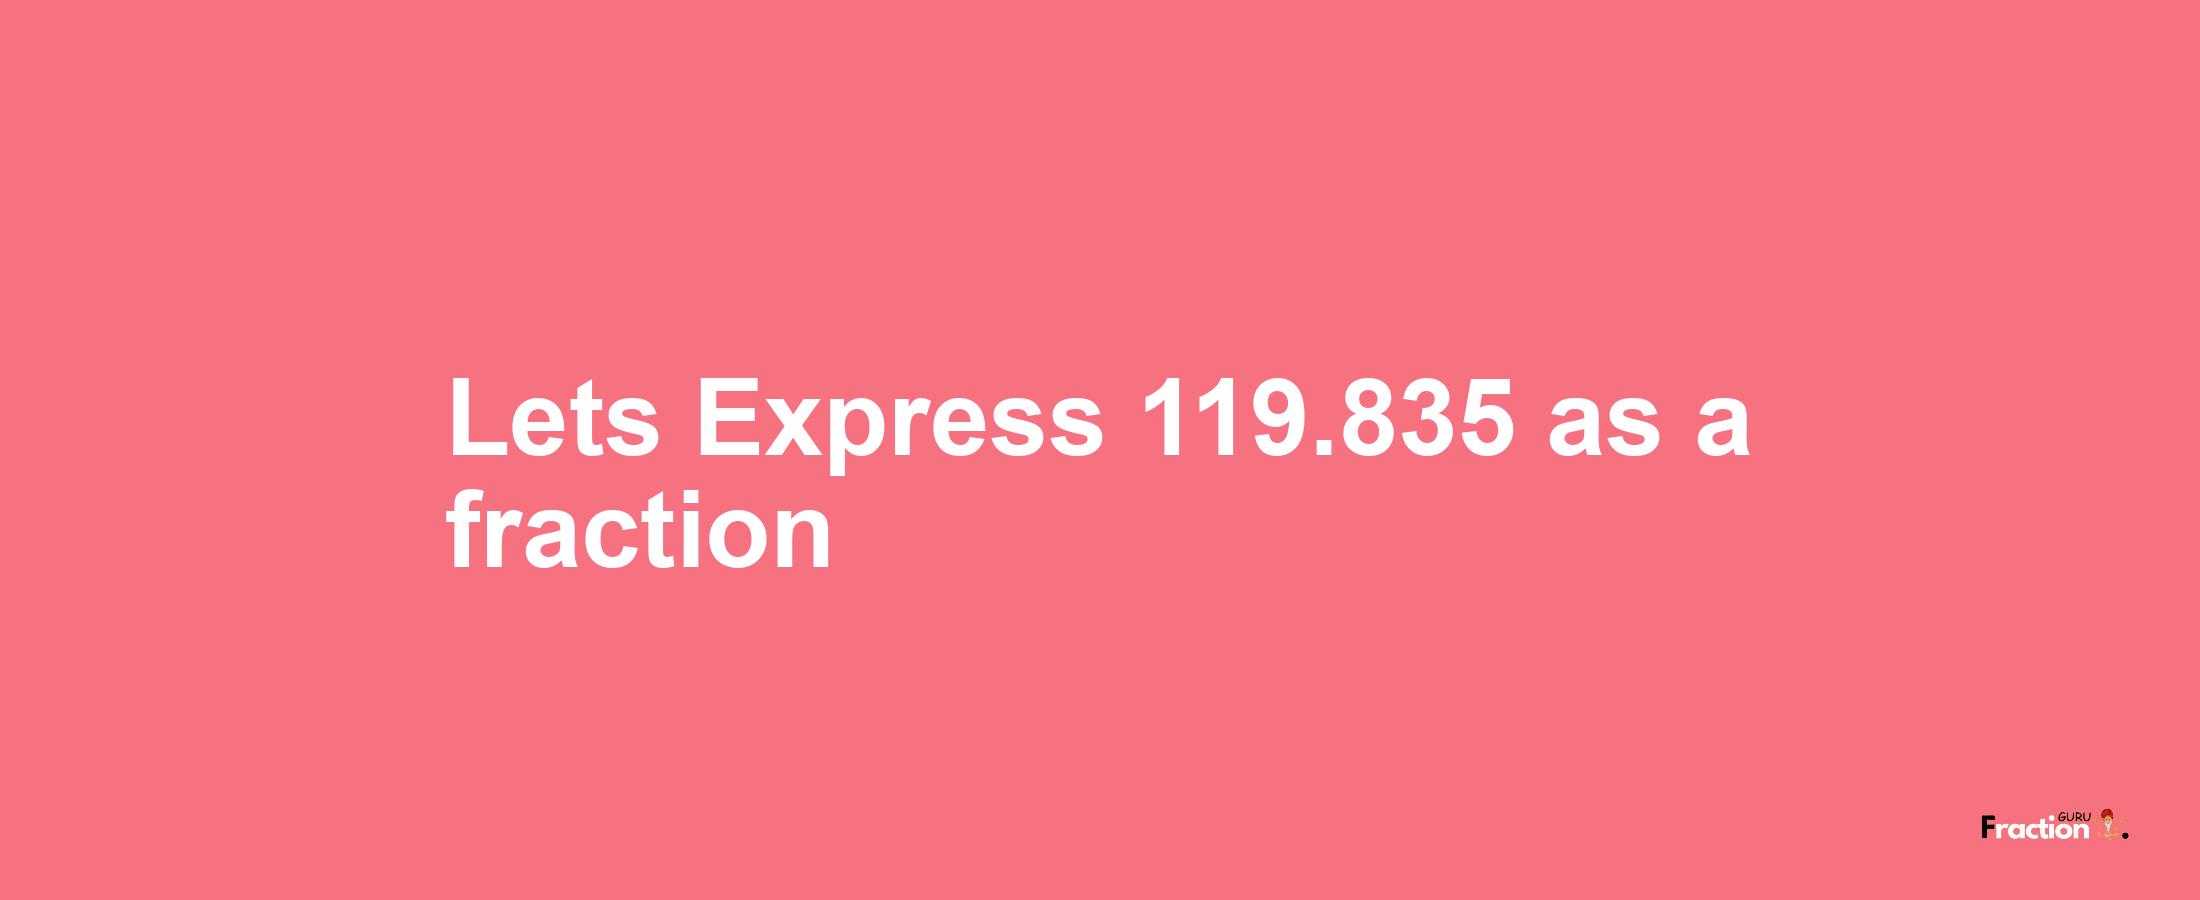 Lets Express 119.835 as afraction